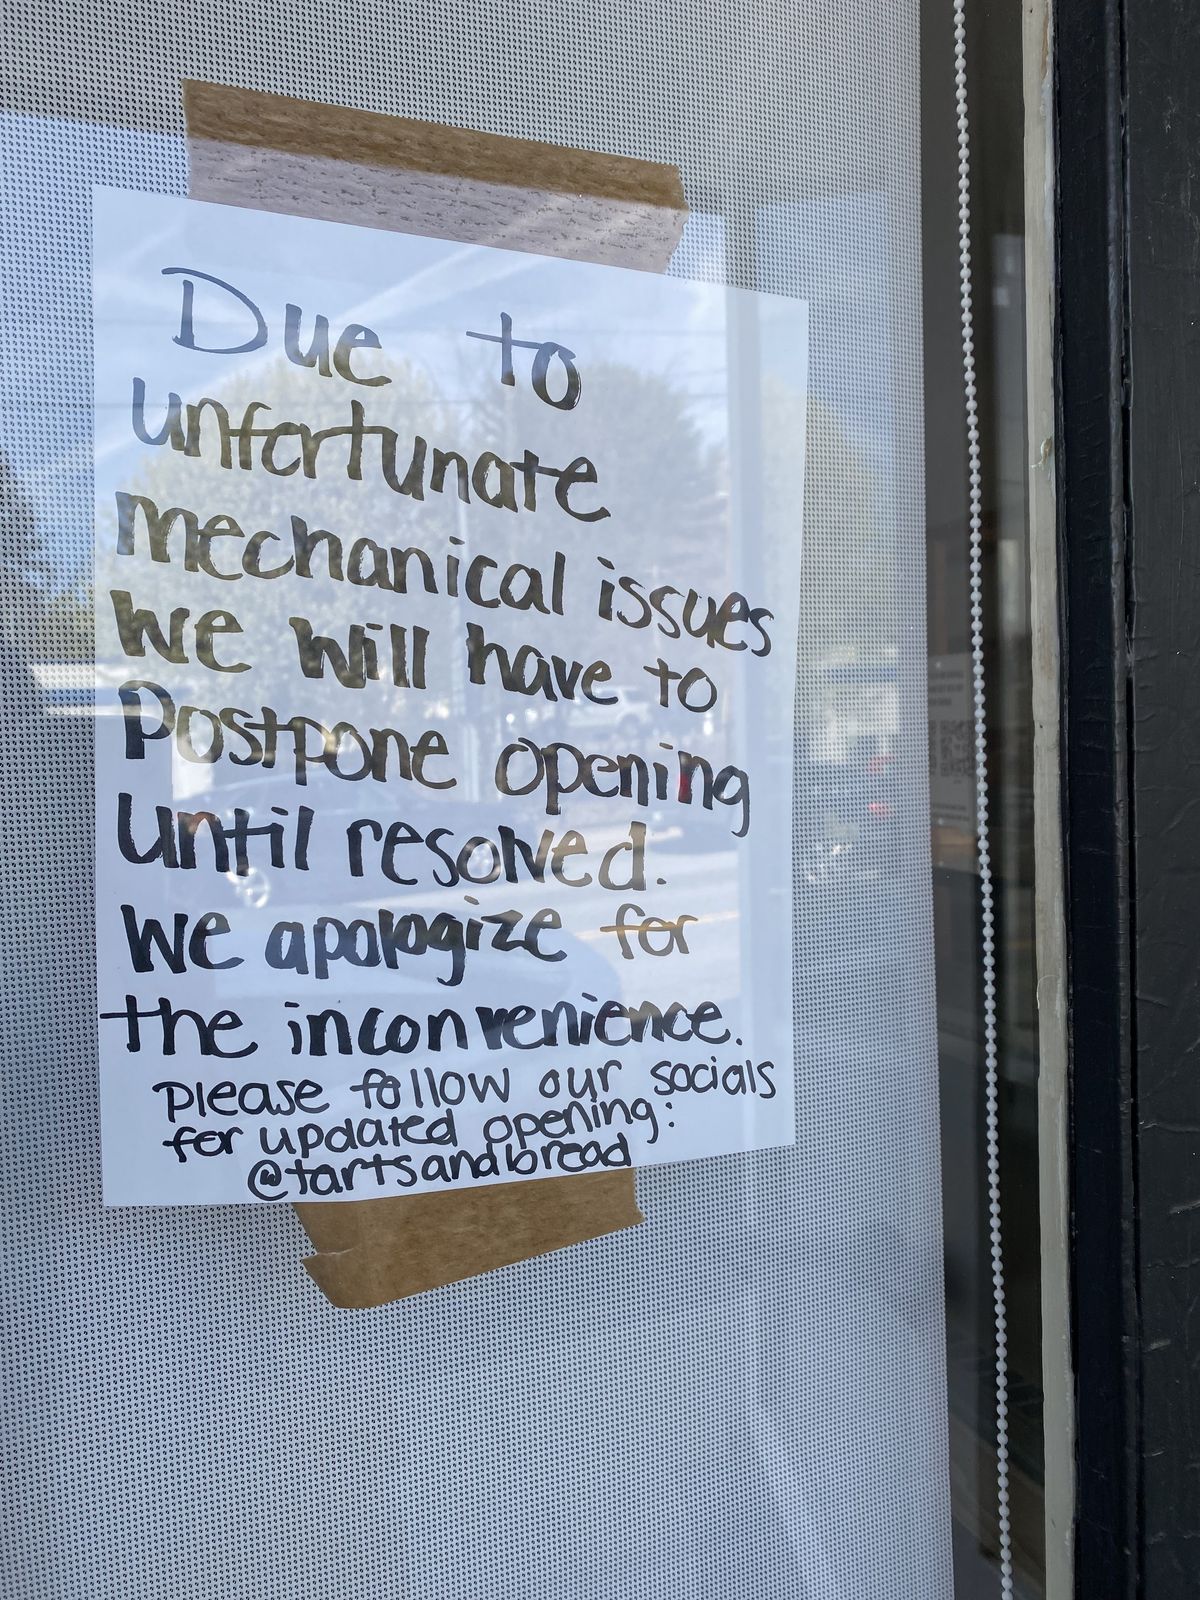 Tarts and Bread opening is now delayed